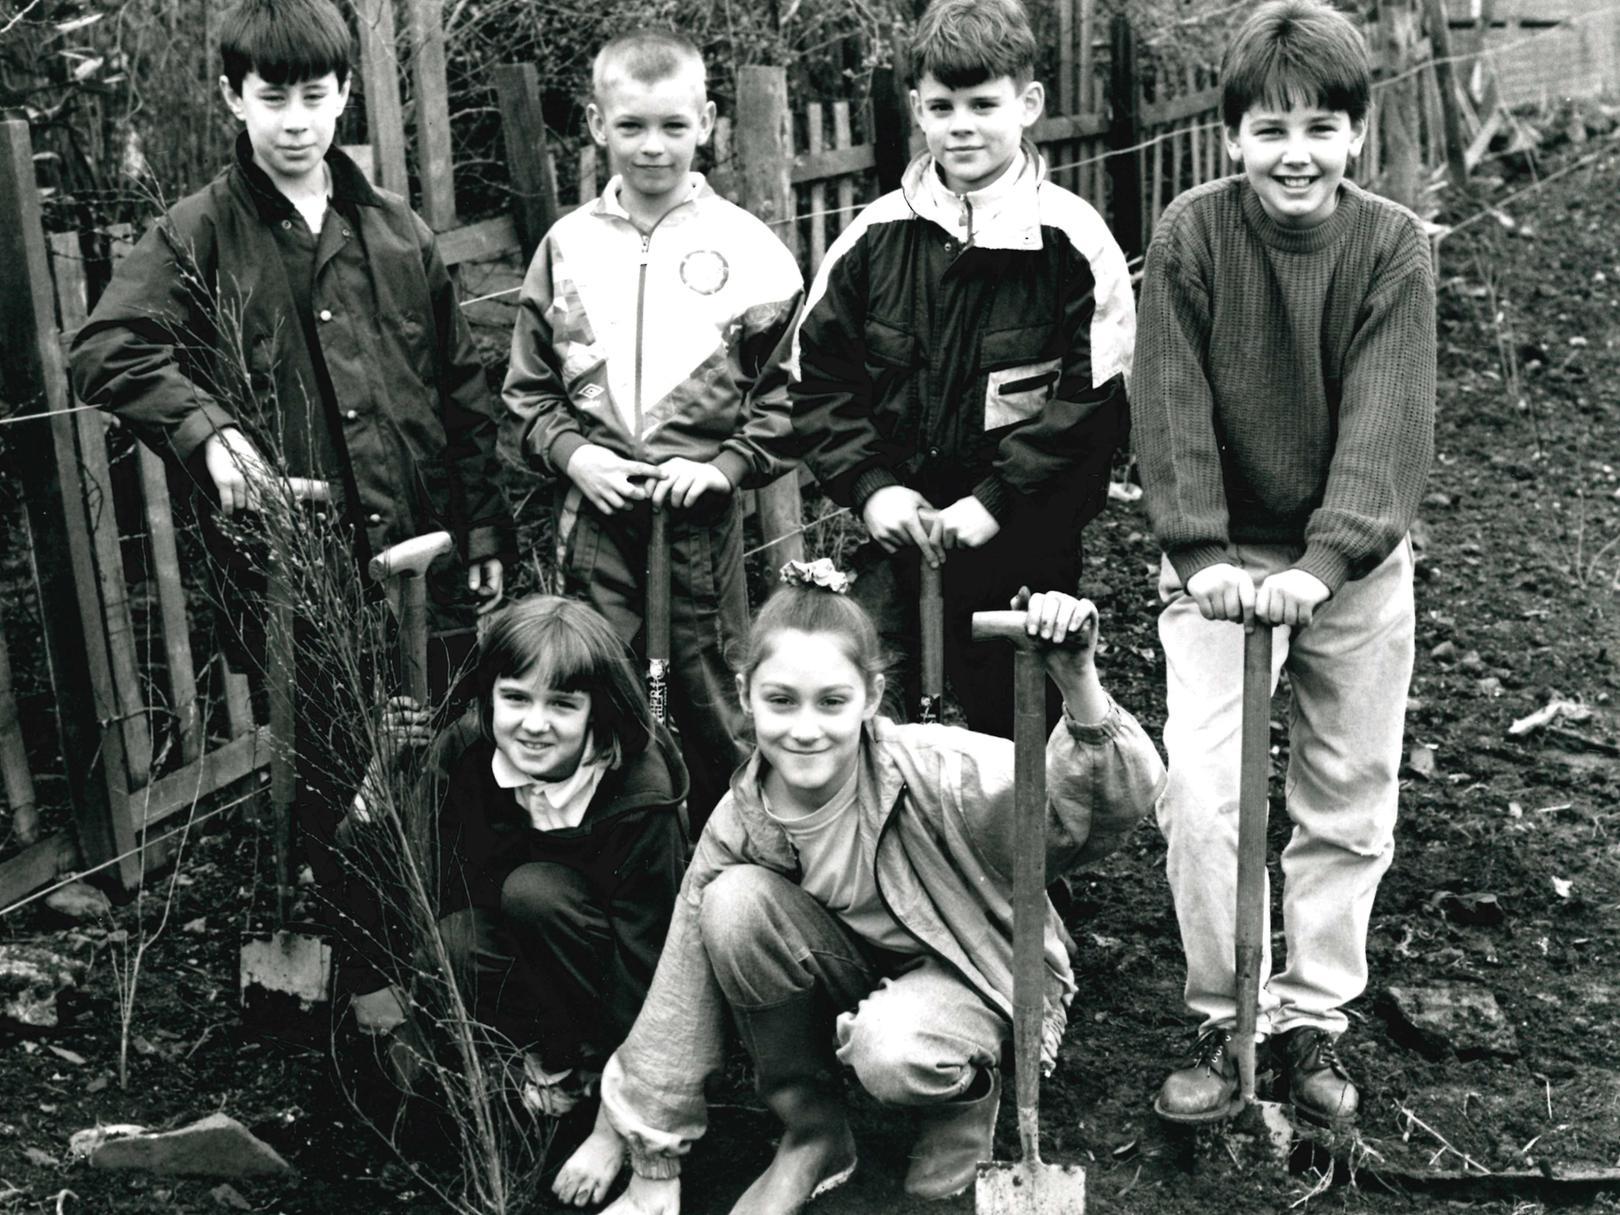 Outwood Junior & Infants School pupils help to create a wildlife garden at Outwood Bowling Club, 1992.